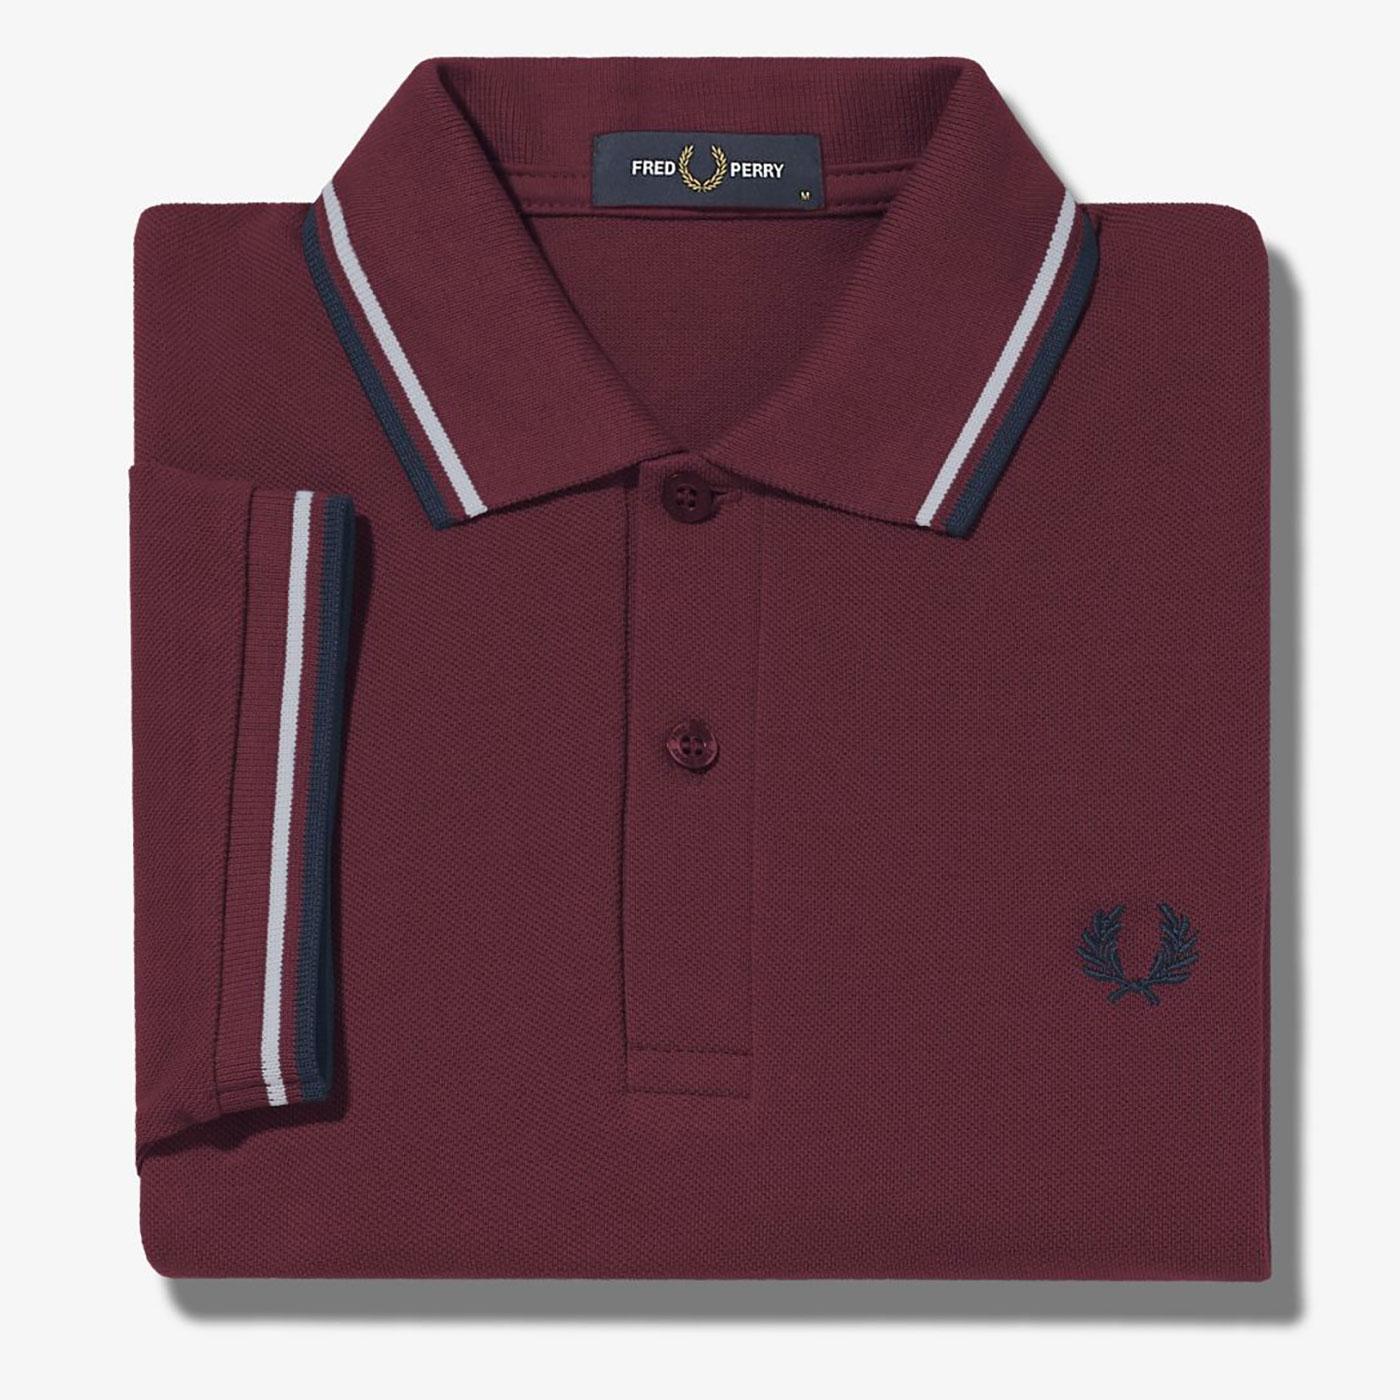 FRED PERRY M3600 Twin Tipped Mod Polo in Aubergine